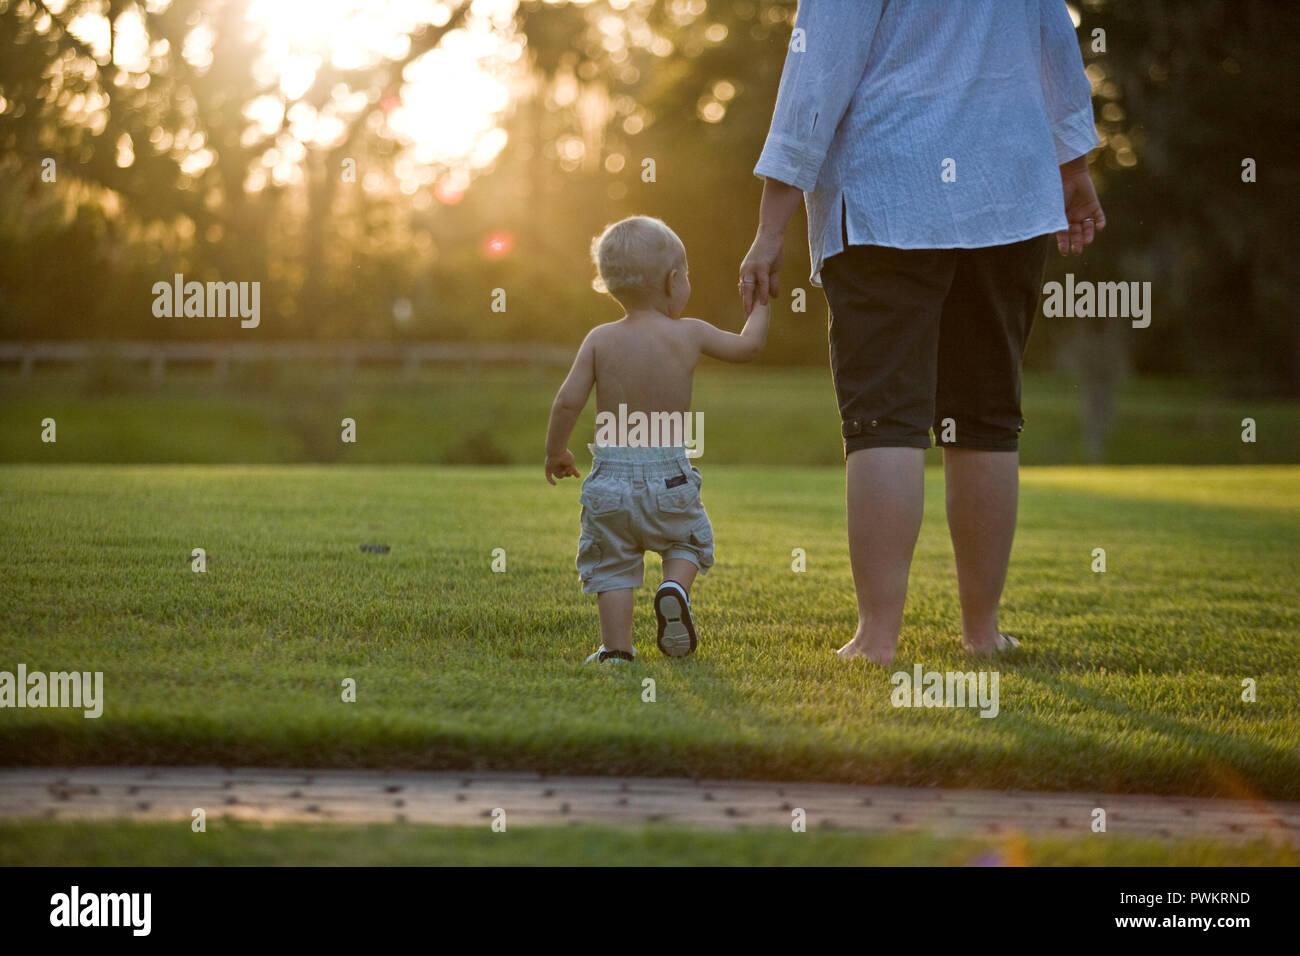 Young toddler holding hands with his father. Stock Photo